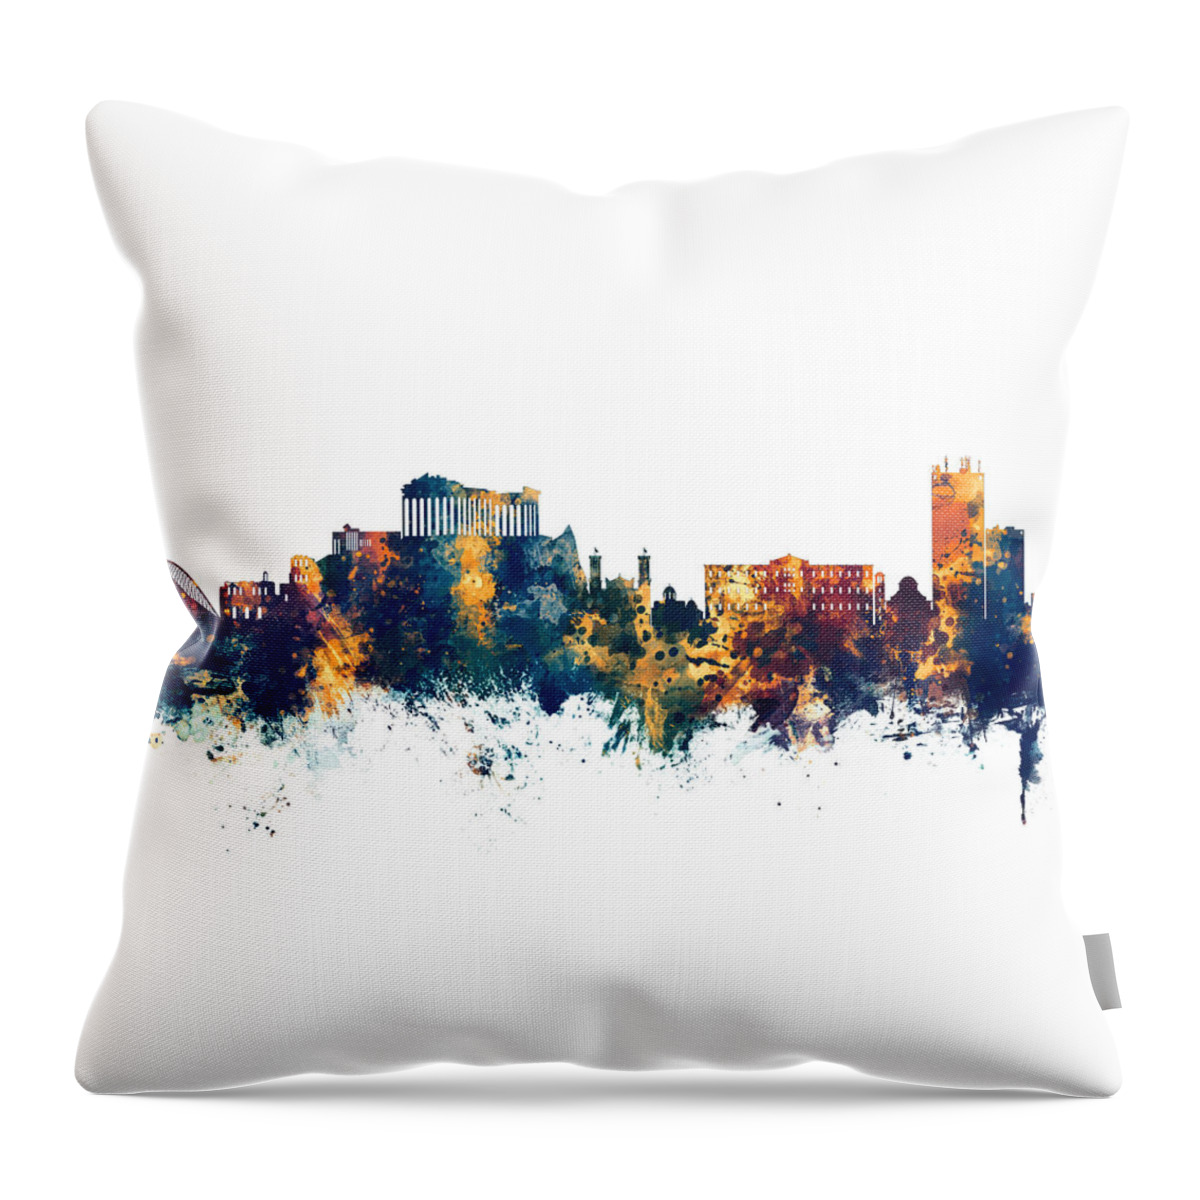 Athens Throw Pillow featuring the digital art Athens Greece Skyline by Michael Tompsett